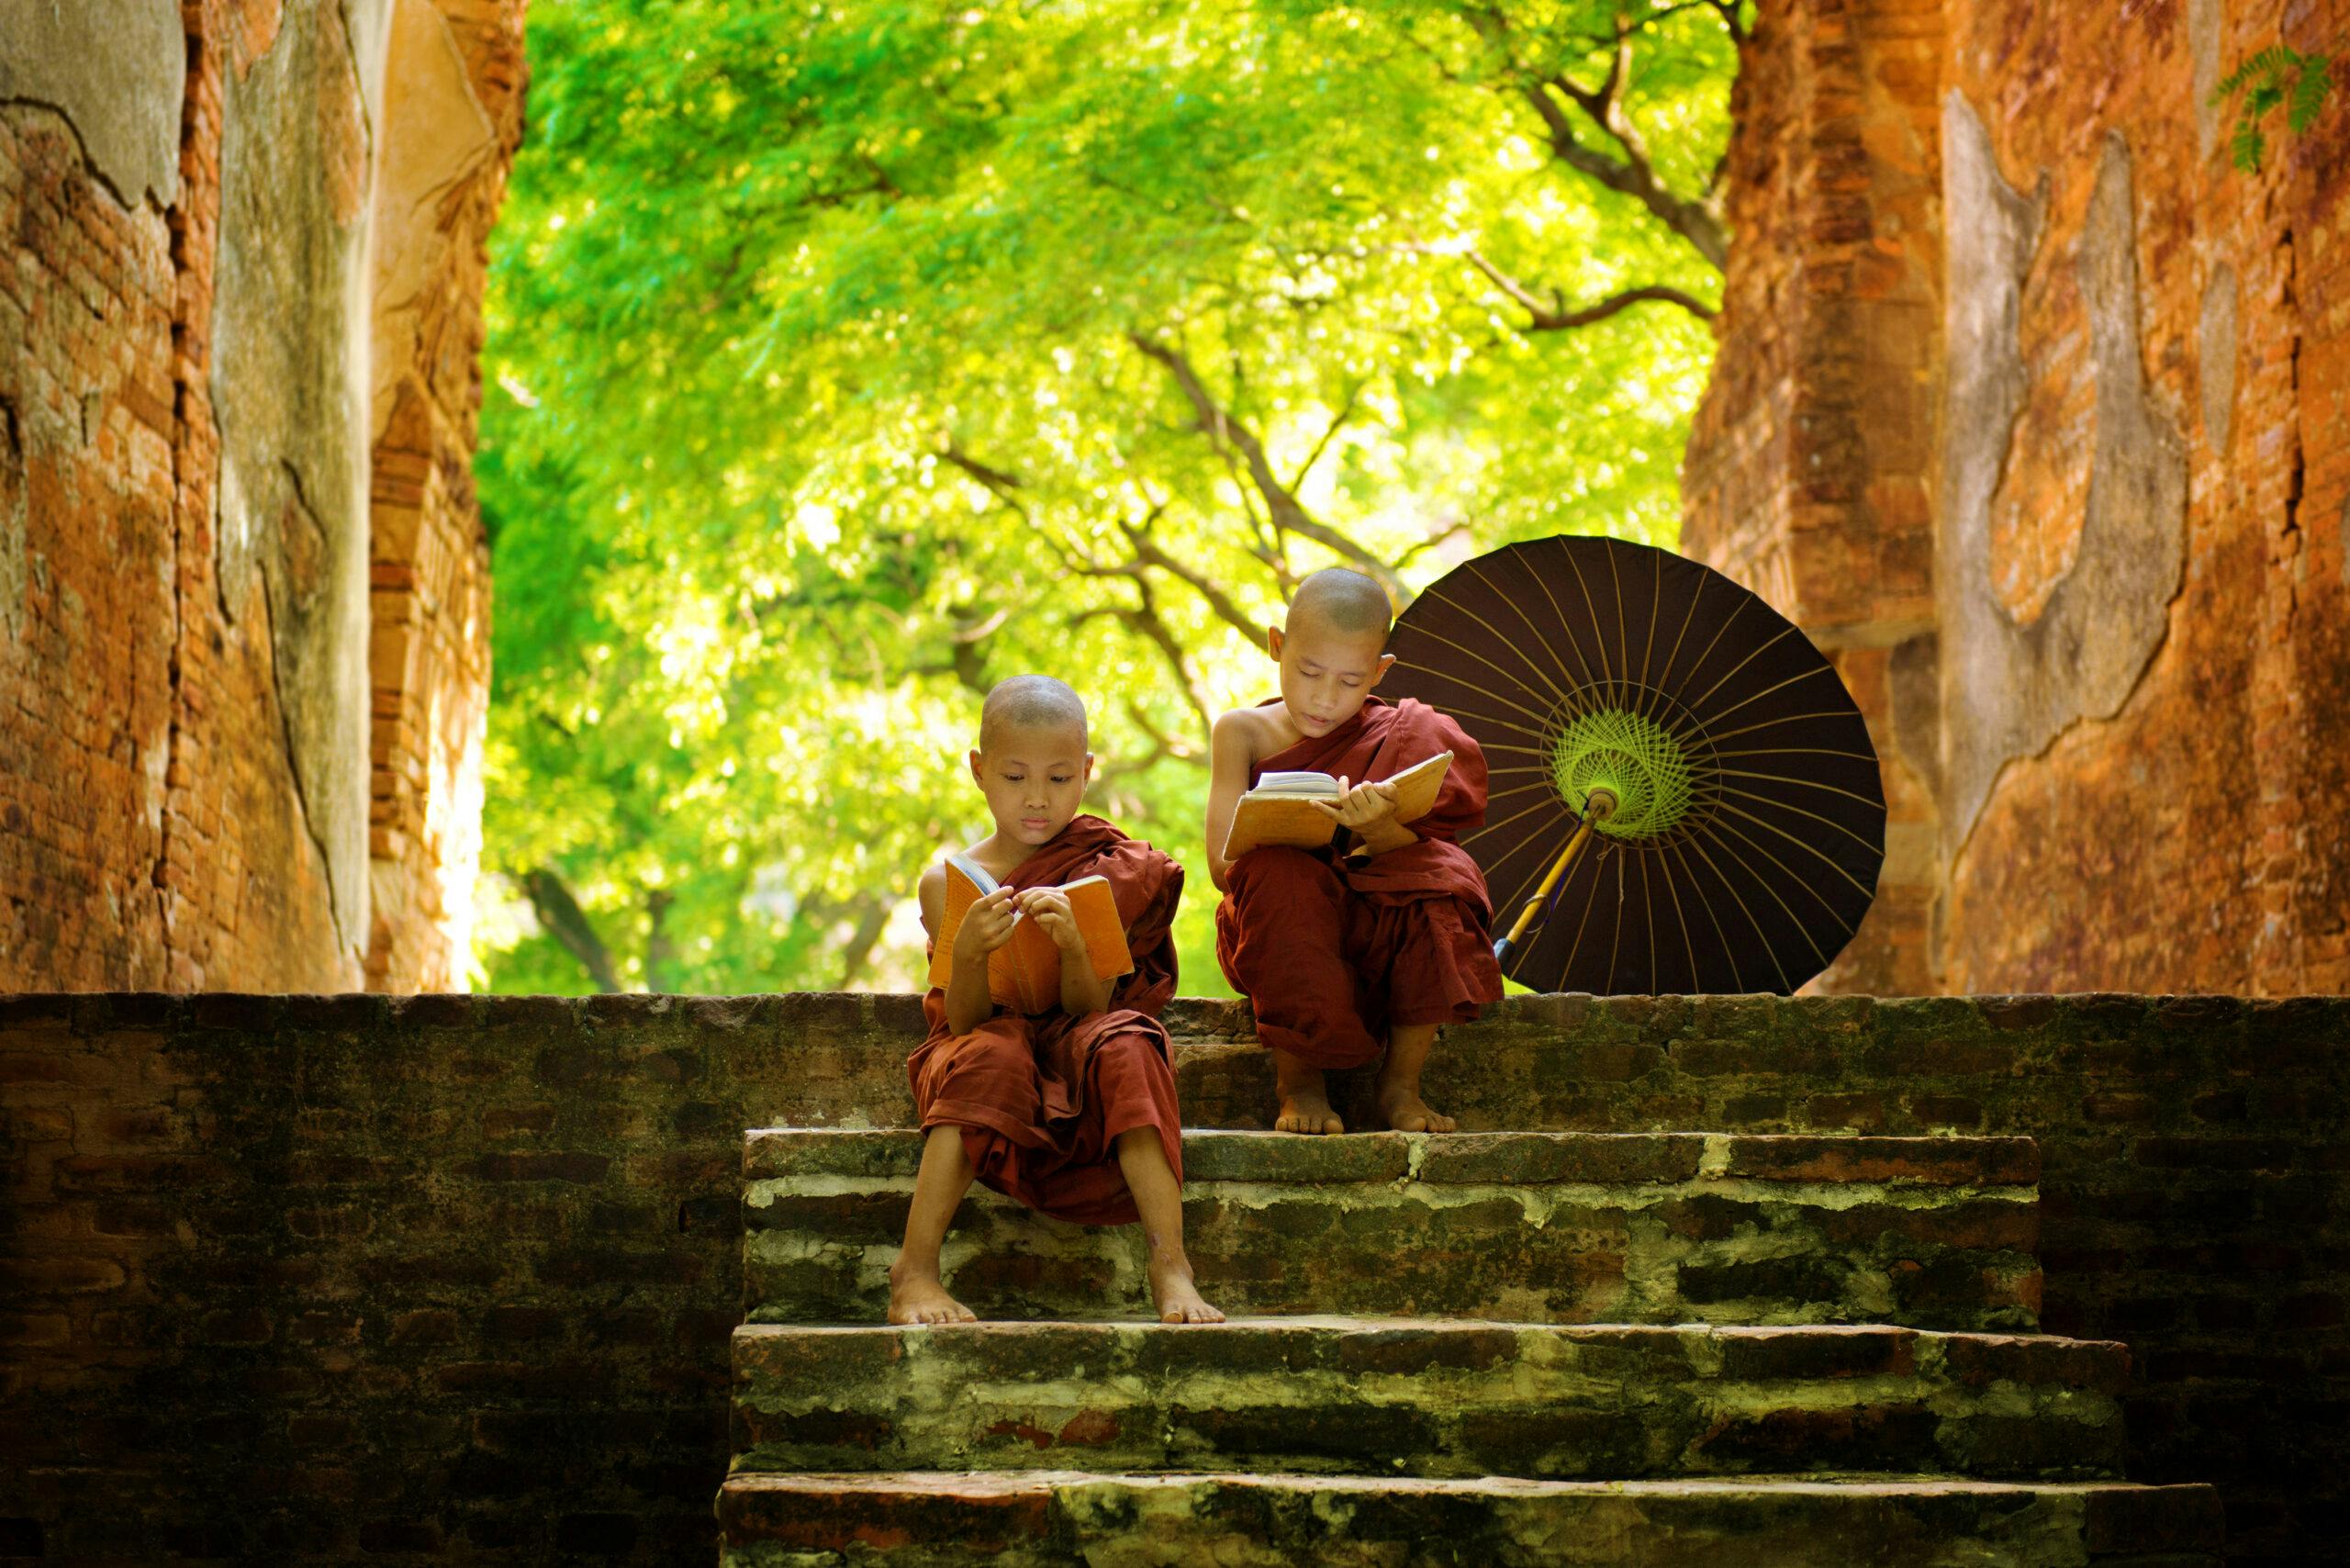 Two monks sitting on steps with an umbrella.